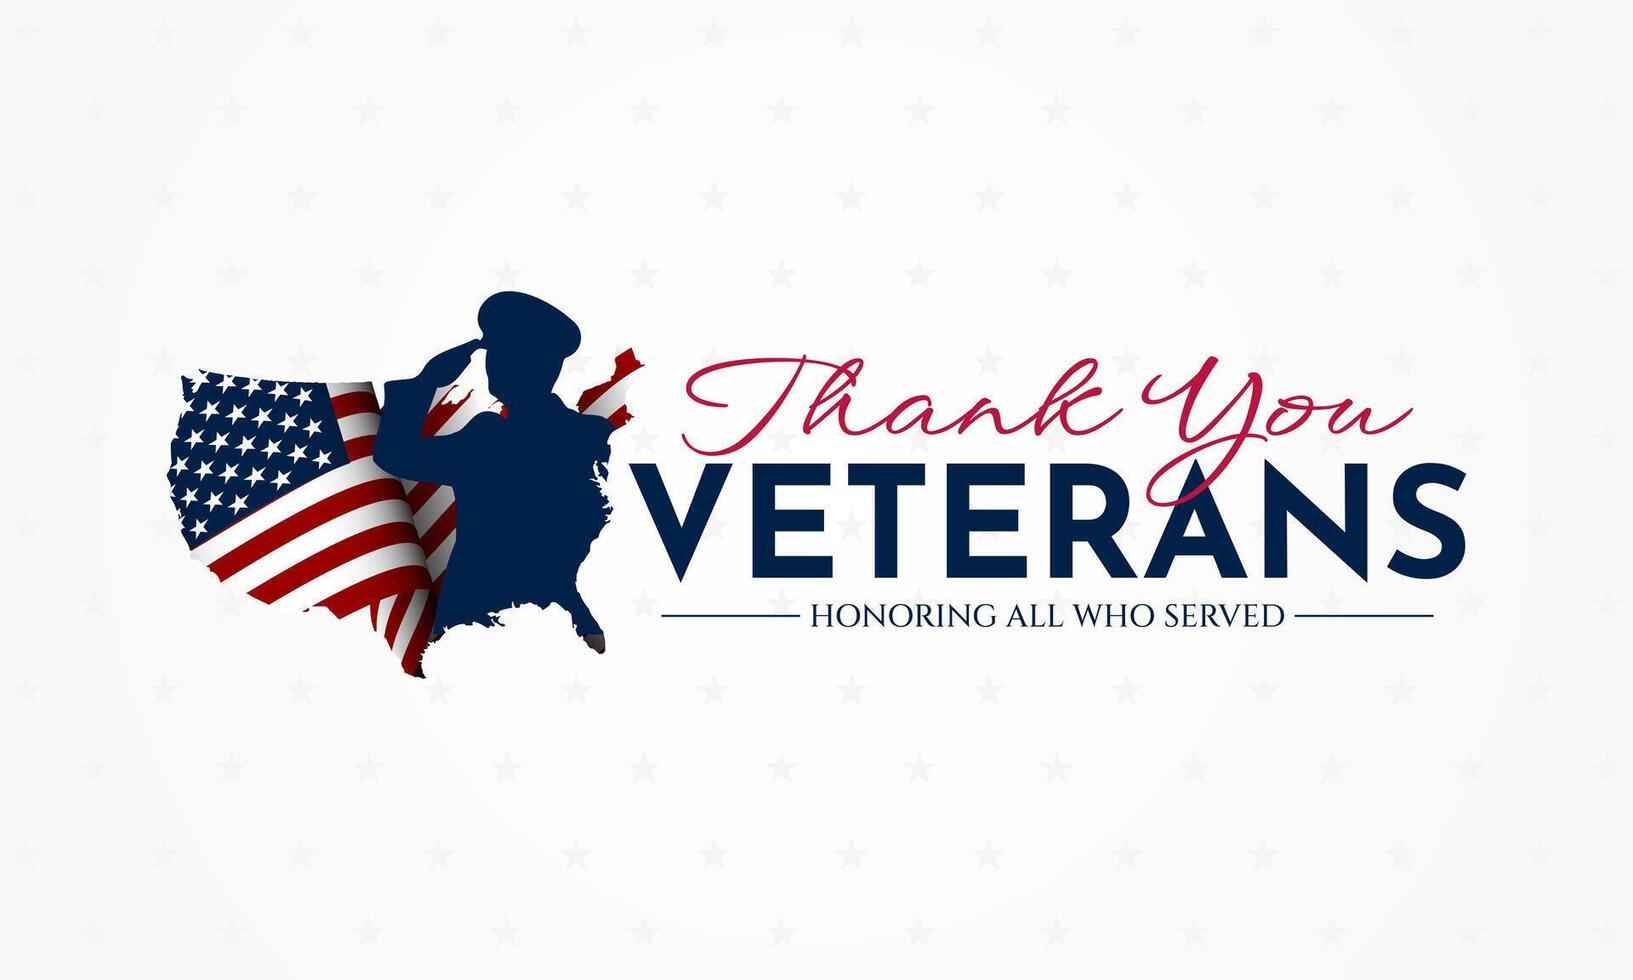 Thank you veterans, November 11, honoring all who served, American flags background illustration vector